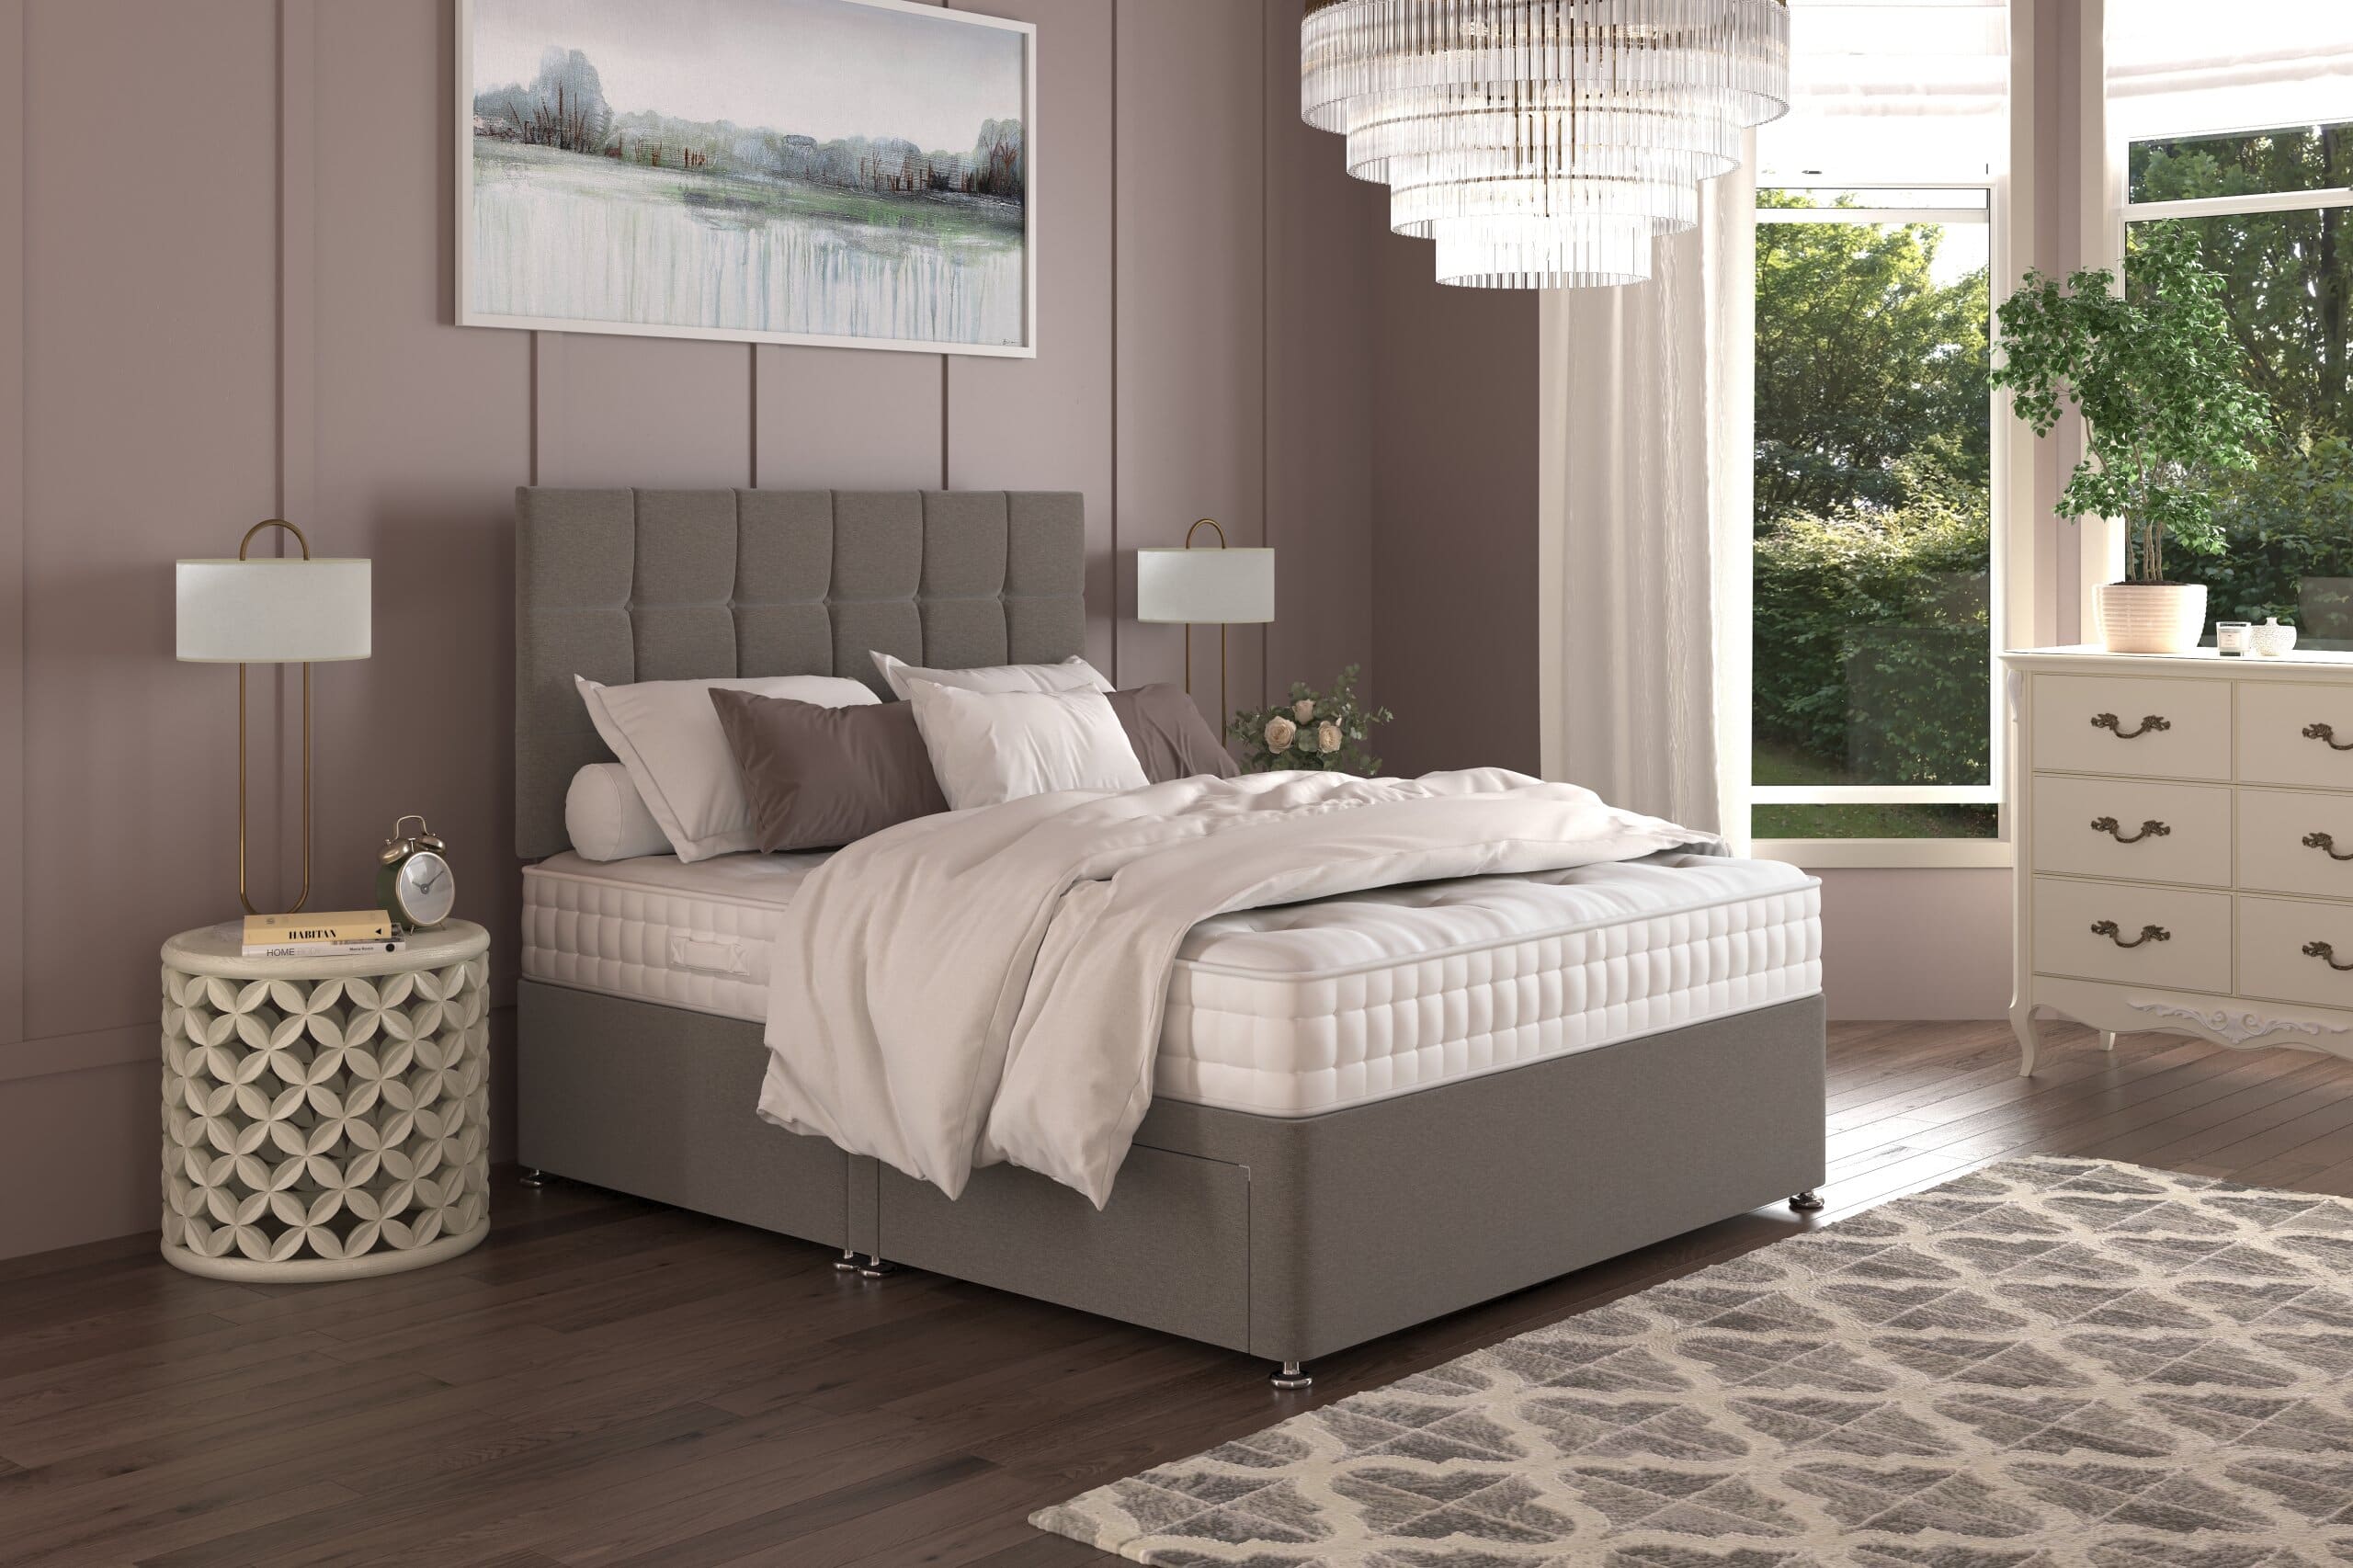 Image of the Hypnos Ultimate Ortho Mattress on a grey divan bed.